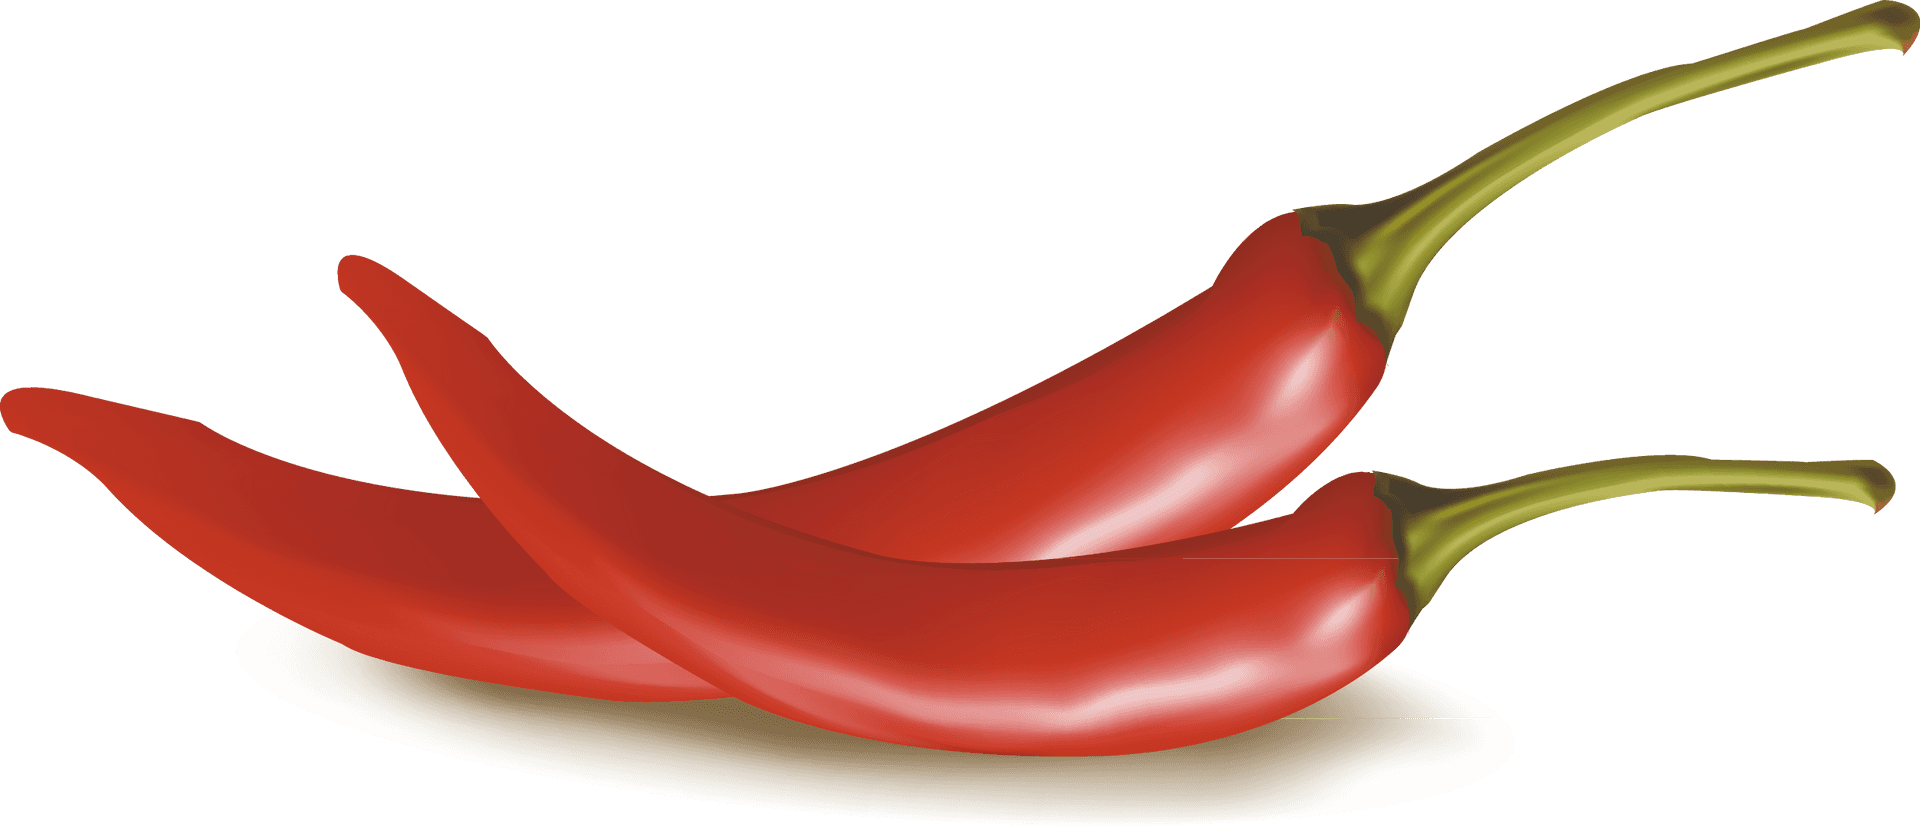 Red Chili Peppers Vector Illustration PNG